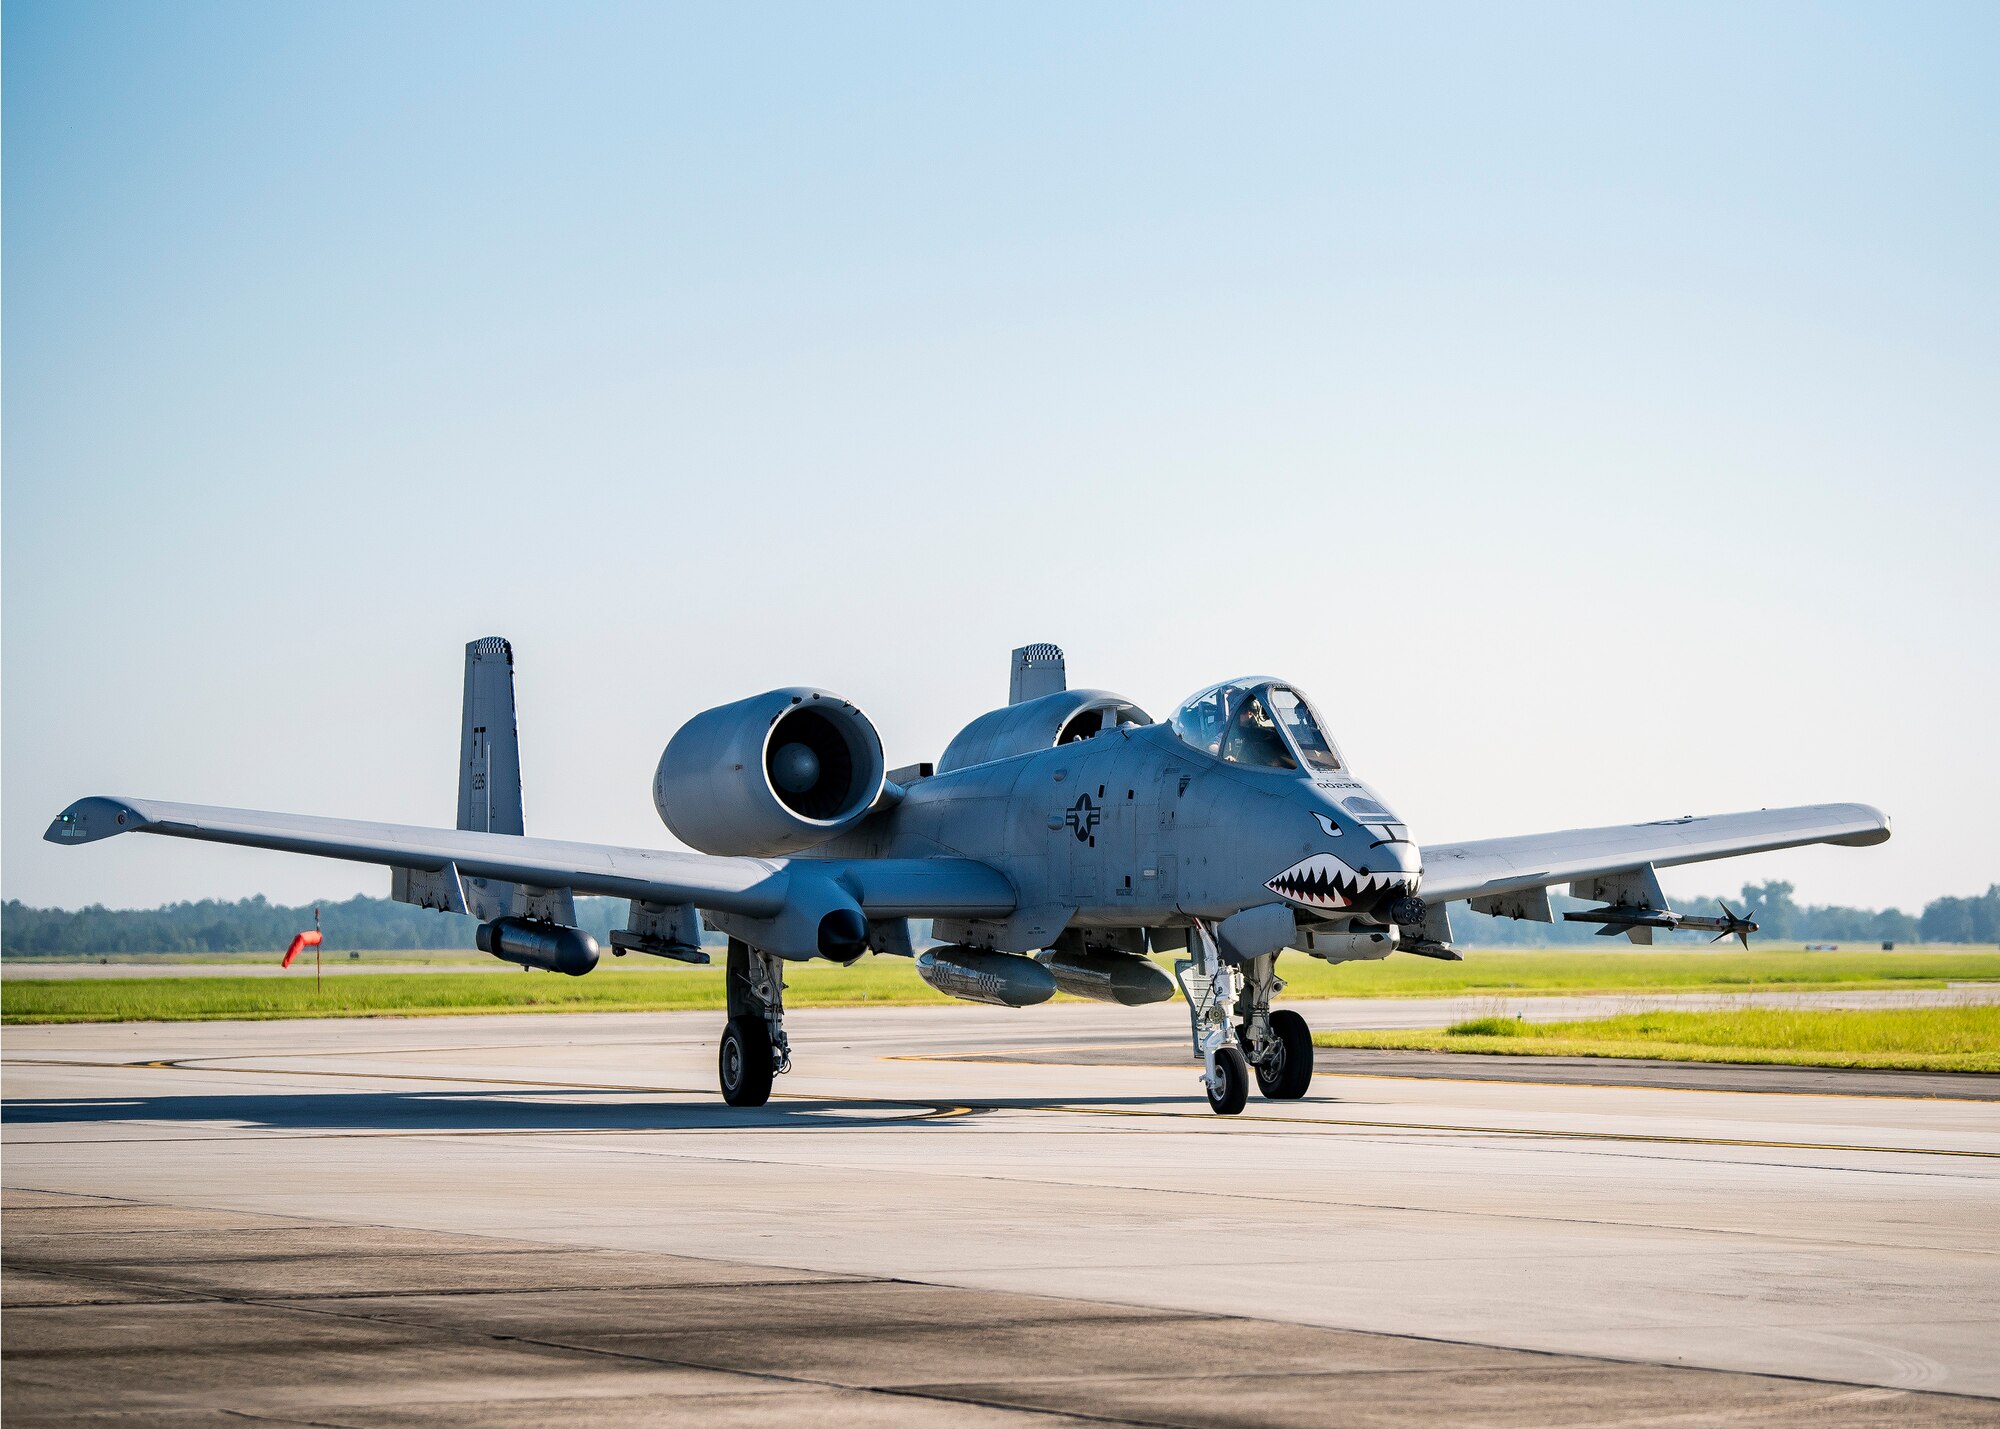 An A-10C Thunderbolt II, taxis to the runway prior to departure for Little Rock Air Force Base, Ark., Aug. 30, 2019, at Moody AFB, Ga. Moody’s A-10s were relocated to Little Rock in anticipation of Hurricane Dorian. (U.S. Air Force photo by Airman 1st Class Eugene Oliver)